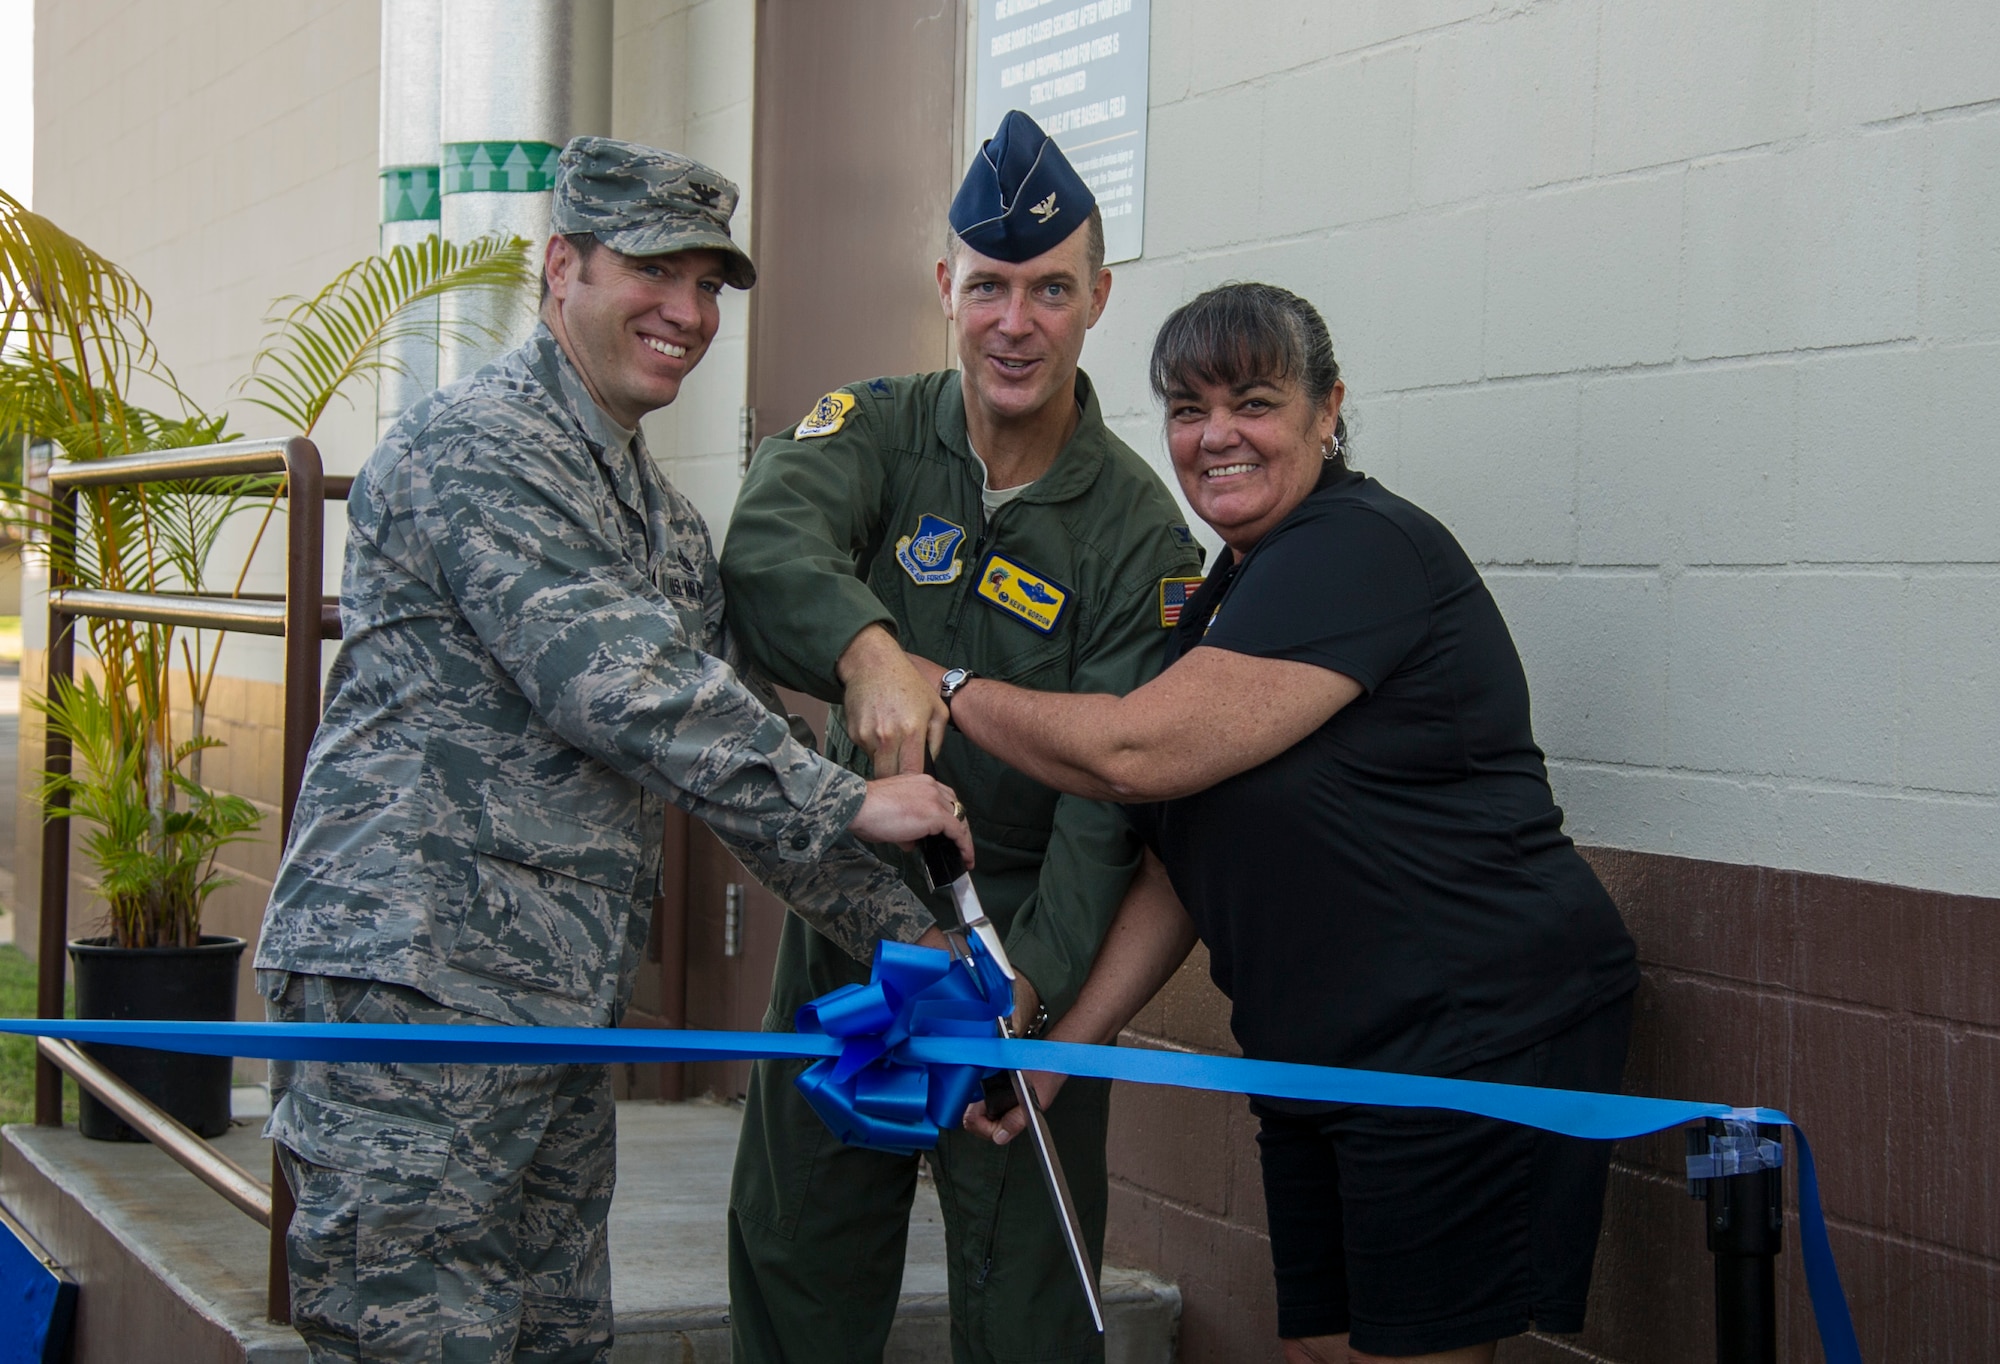 Col. Douglas Pierce, Joint Base Pearl Harbor-Hickam deputy commander, Col. Kevin Gordon, 15th Wing commander, and Dawn Pierce, Hickam Gym manager, cut a ribbon for the 24/7 opening of the Hickam Memorial Gym, Joint Base Pearl Harbor-Hickam, Hawaii, Nov. 20, 2017. The gym’s 24-hour access is available to all authorized users over the age of 18. Individuals who do not have a common access card may purchase a proximity card for a nominal fee. (U.S. Air Force photo by Tech. Sgt. Heather Redman)